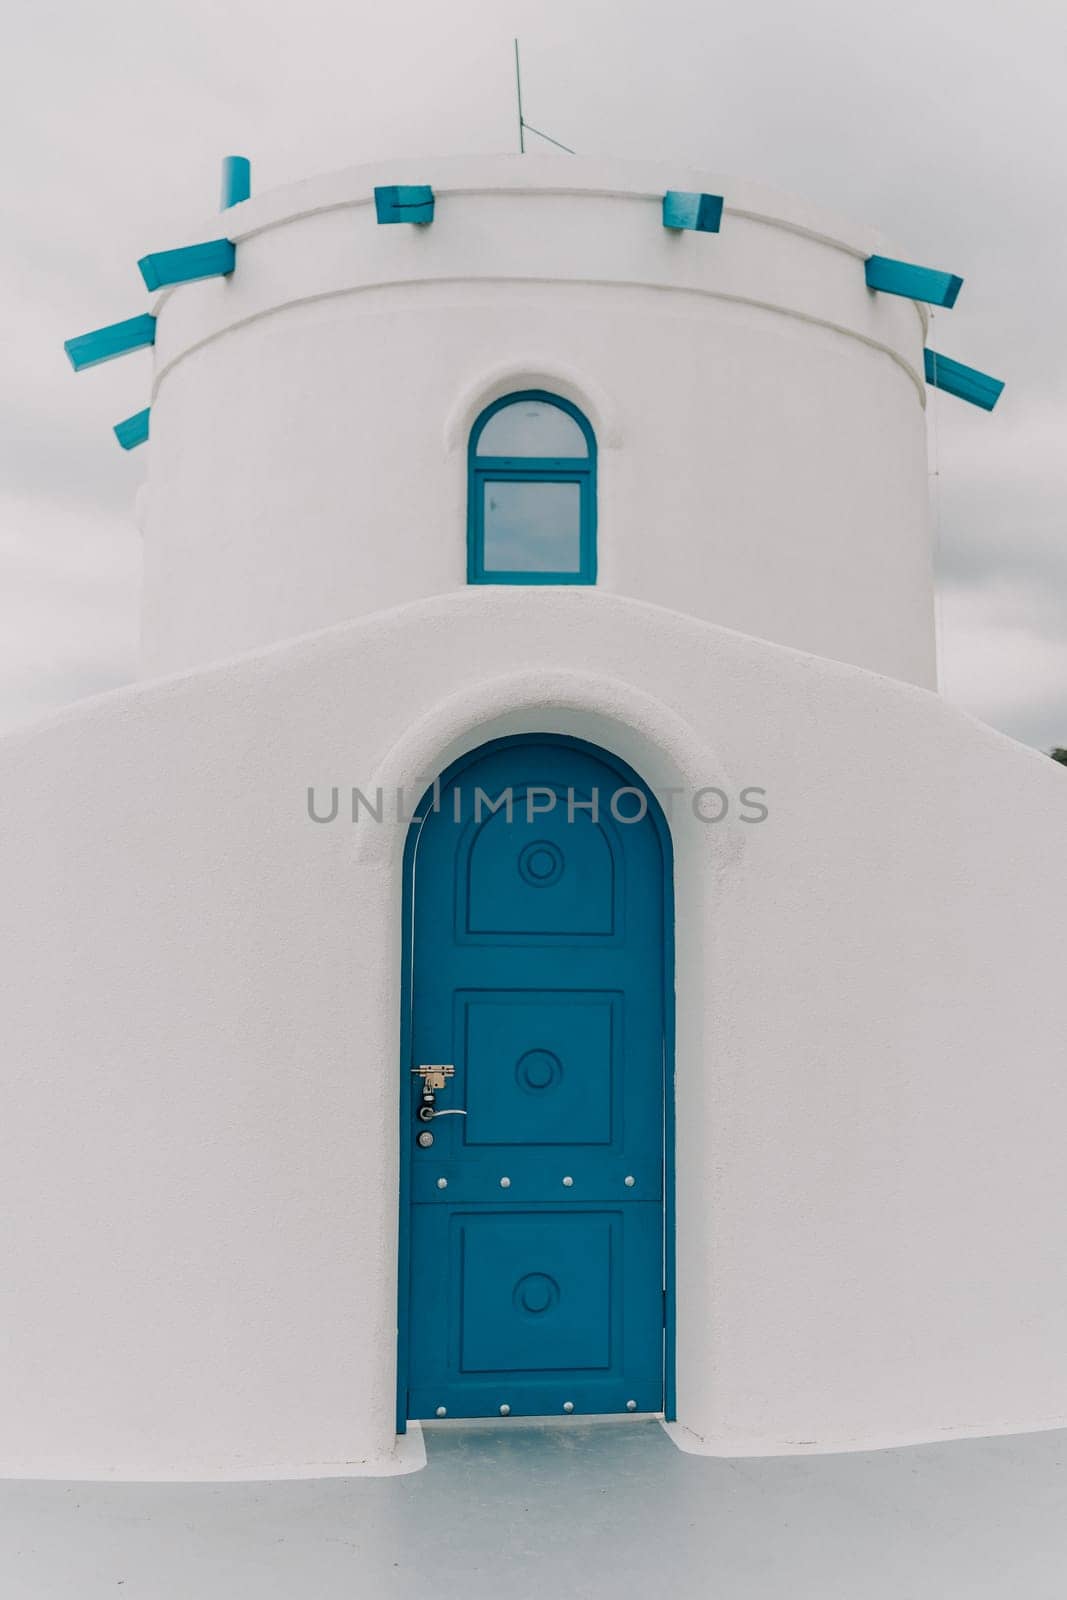 A blue door with a lock sits in front of a white building. The door is the only visible part of the building, and it is blue in color. by Matiunina